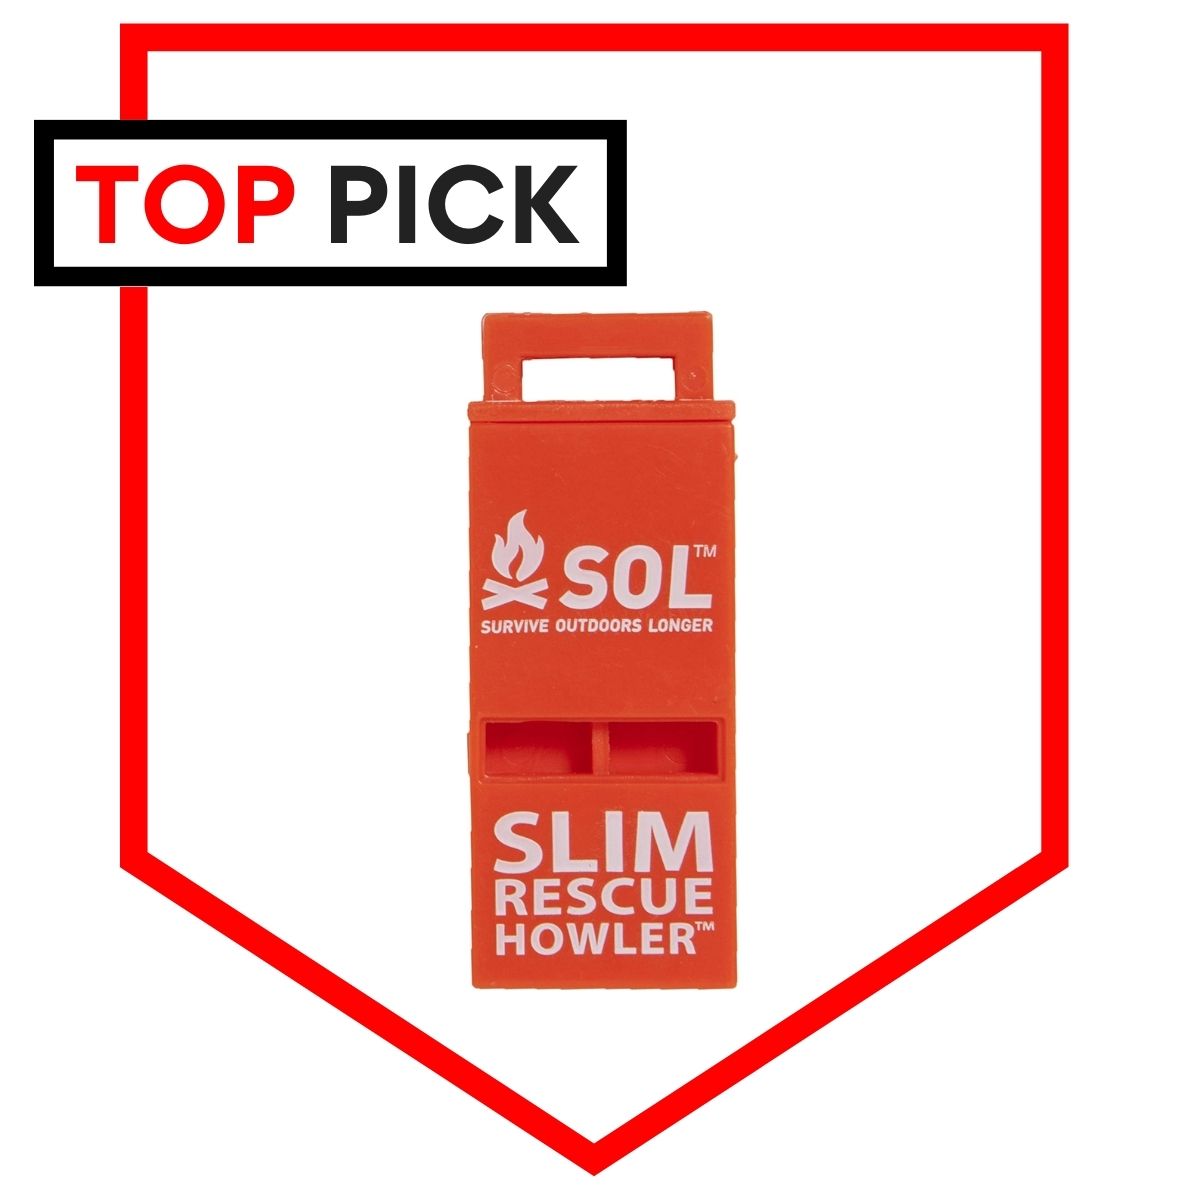 https://www.trueprepper.com/wp-content/uploads/SOL-Slim-Rescue-Howler-Whistle-Loud-Survival-for-Emergencies-Hiking-and-Prepping.jpg